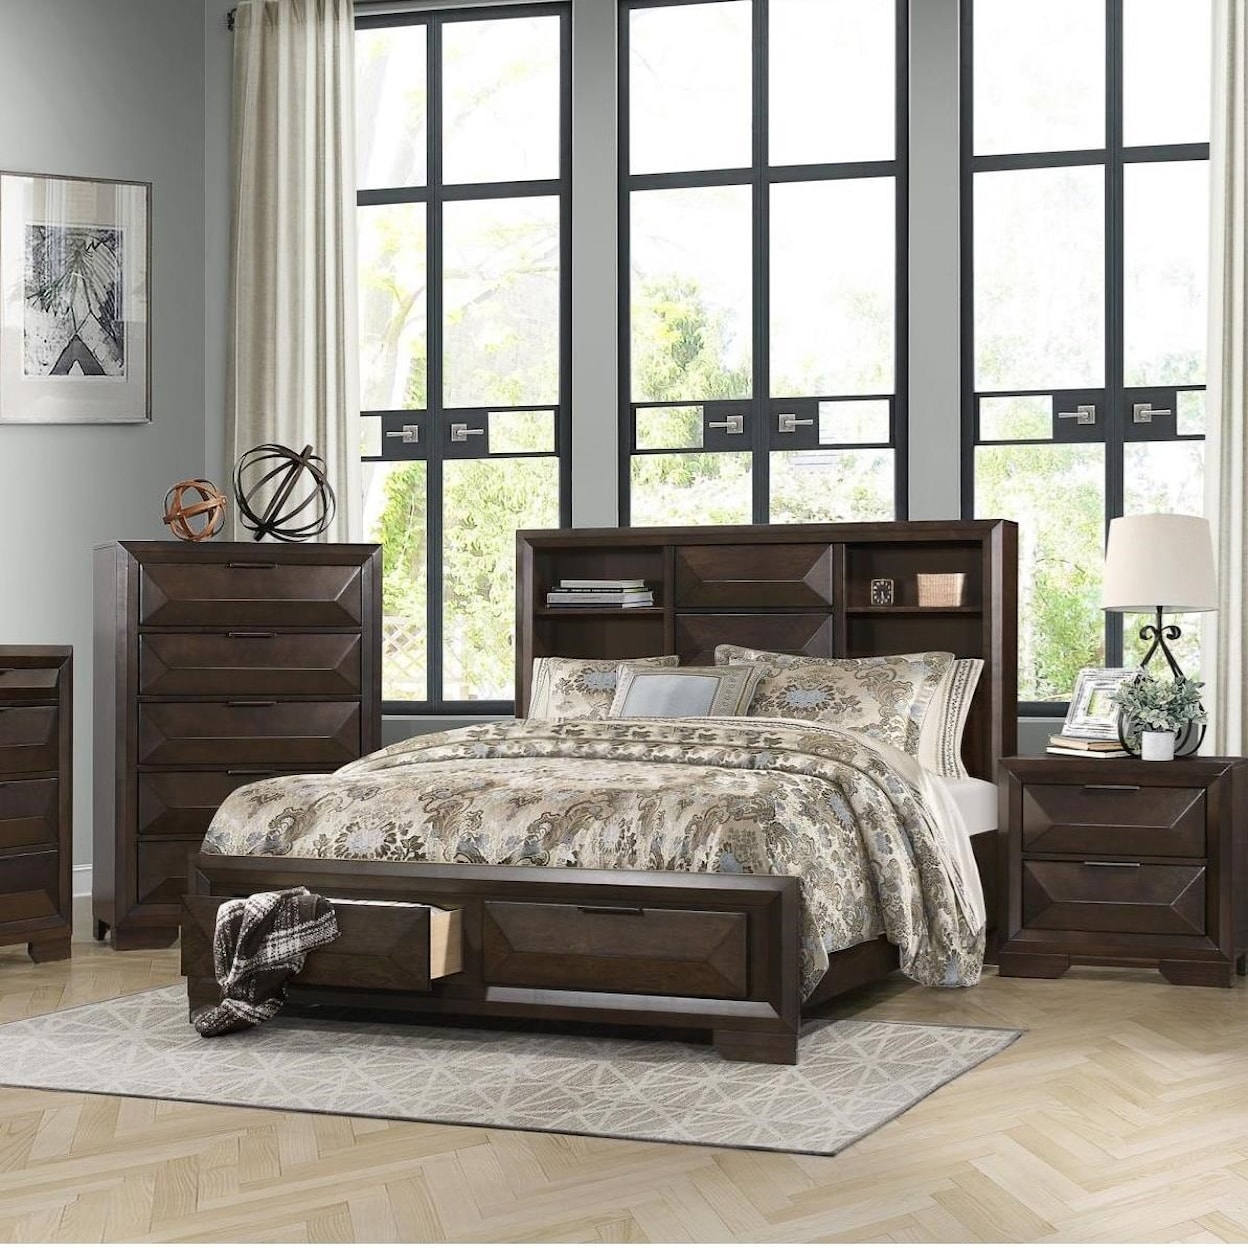 Homelegance Chesky Queen Bookcase Bed